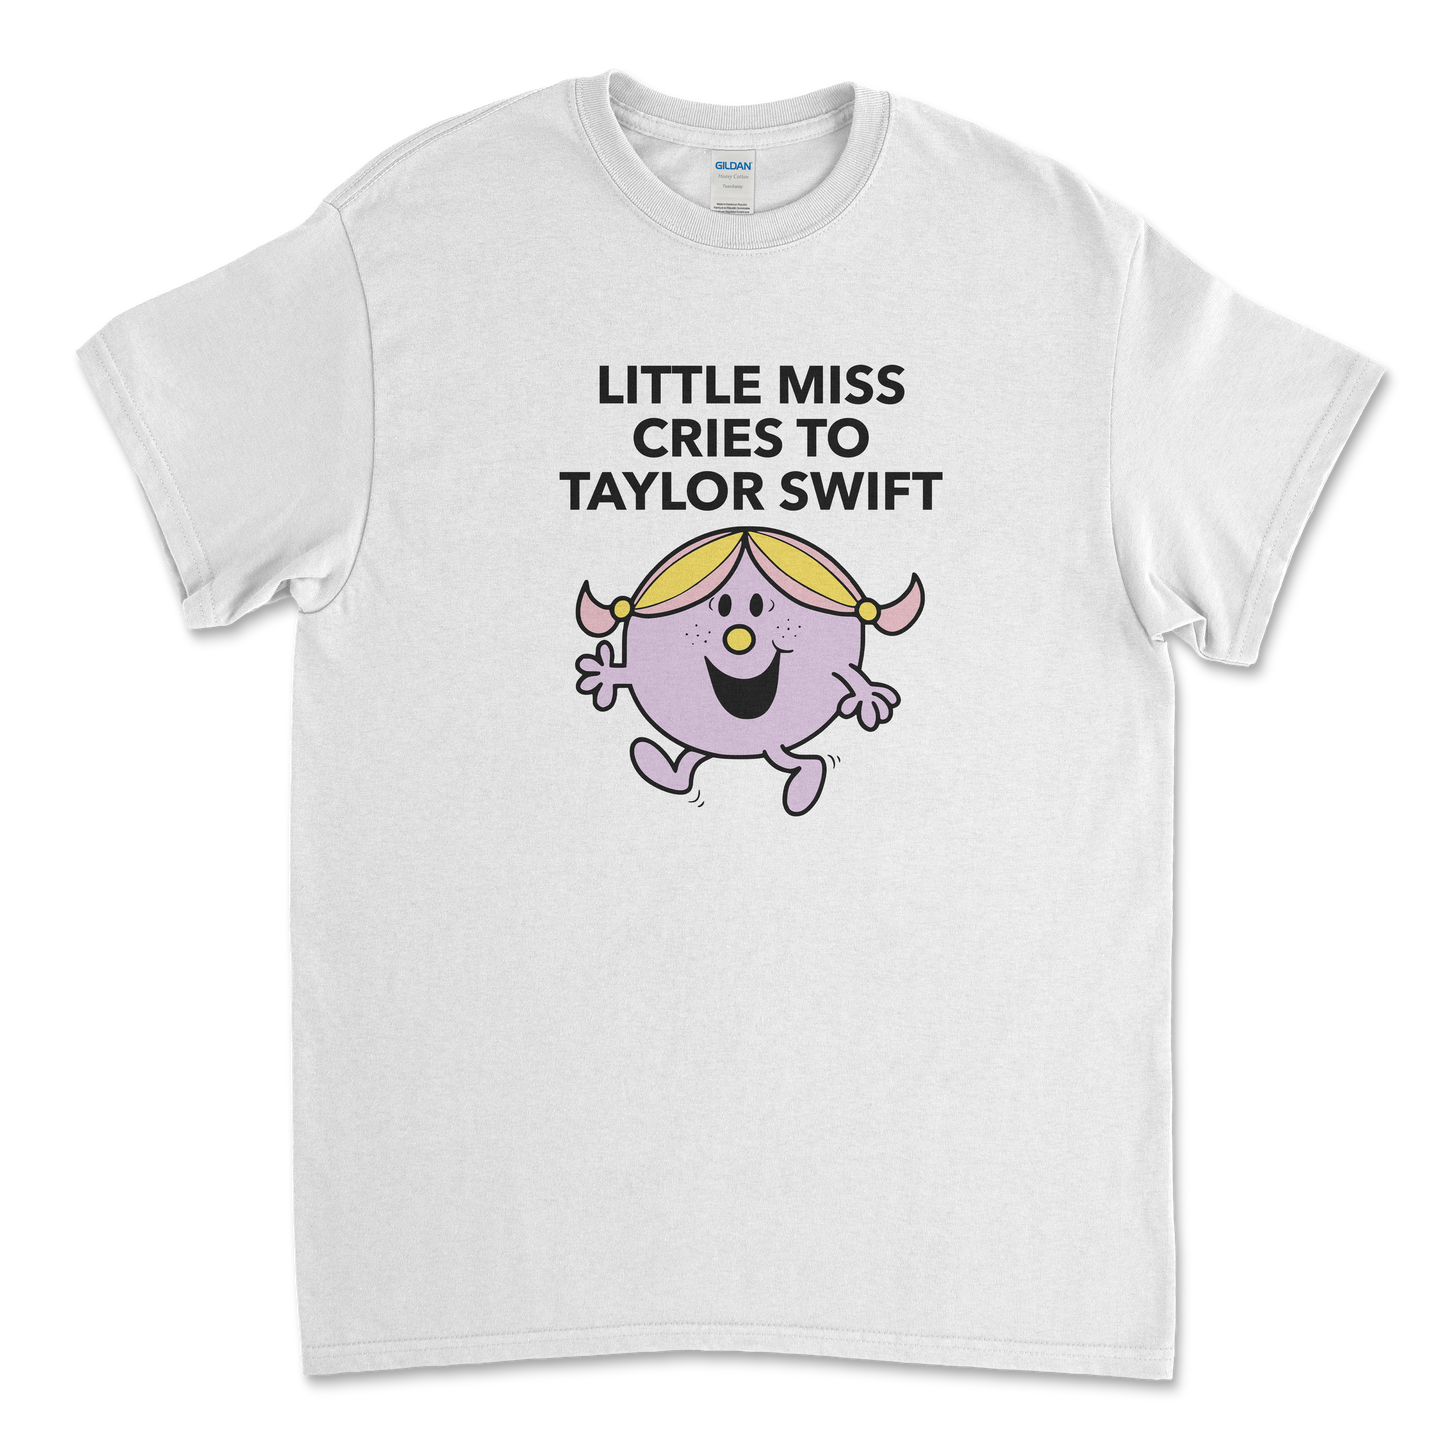 Little Miss Cries to Taylor Swift T-Shirt